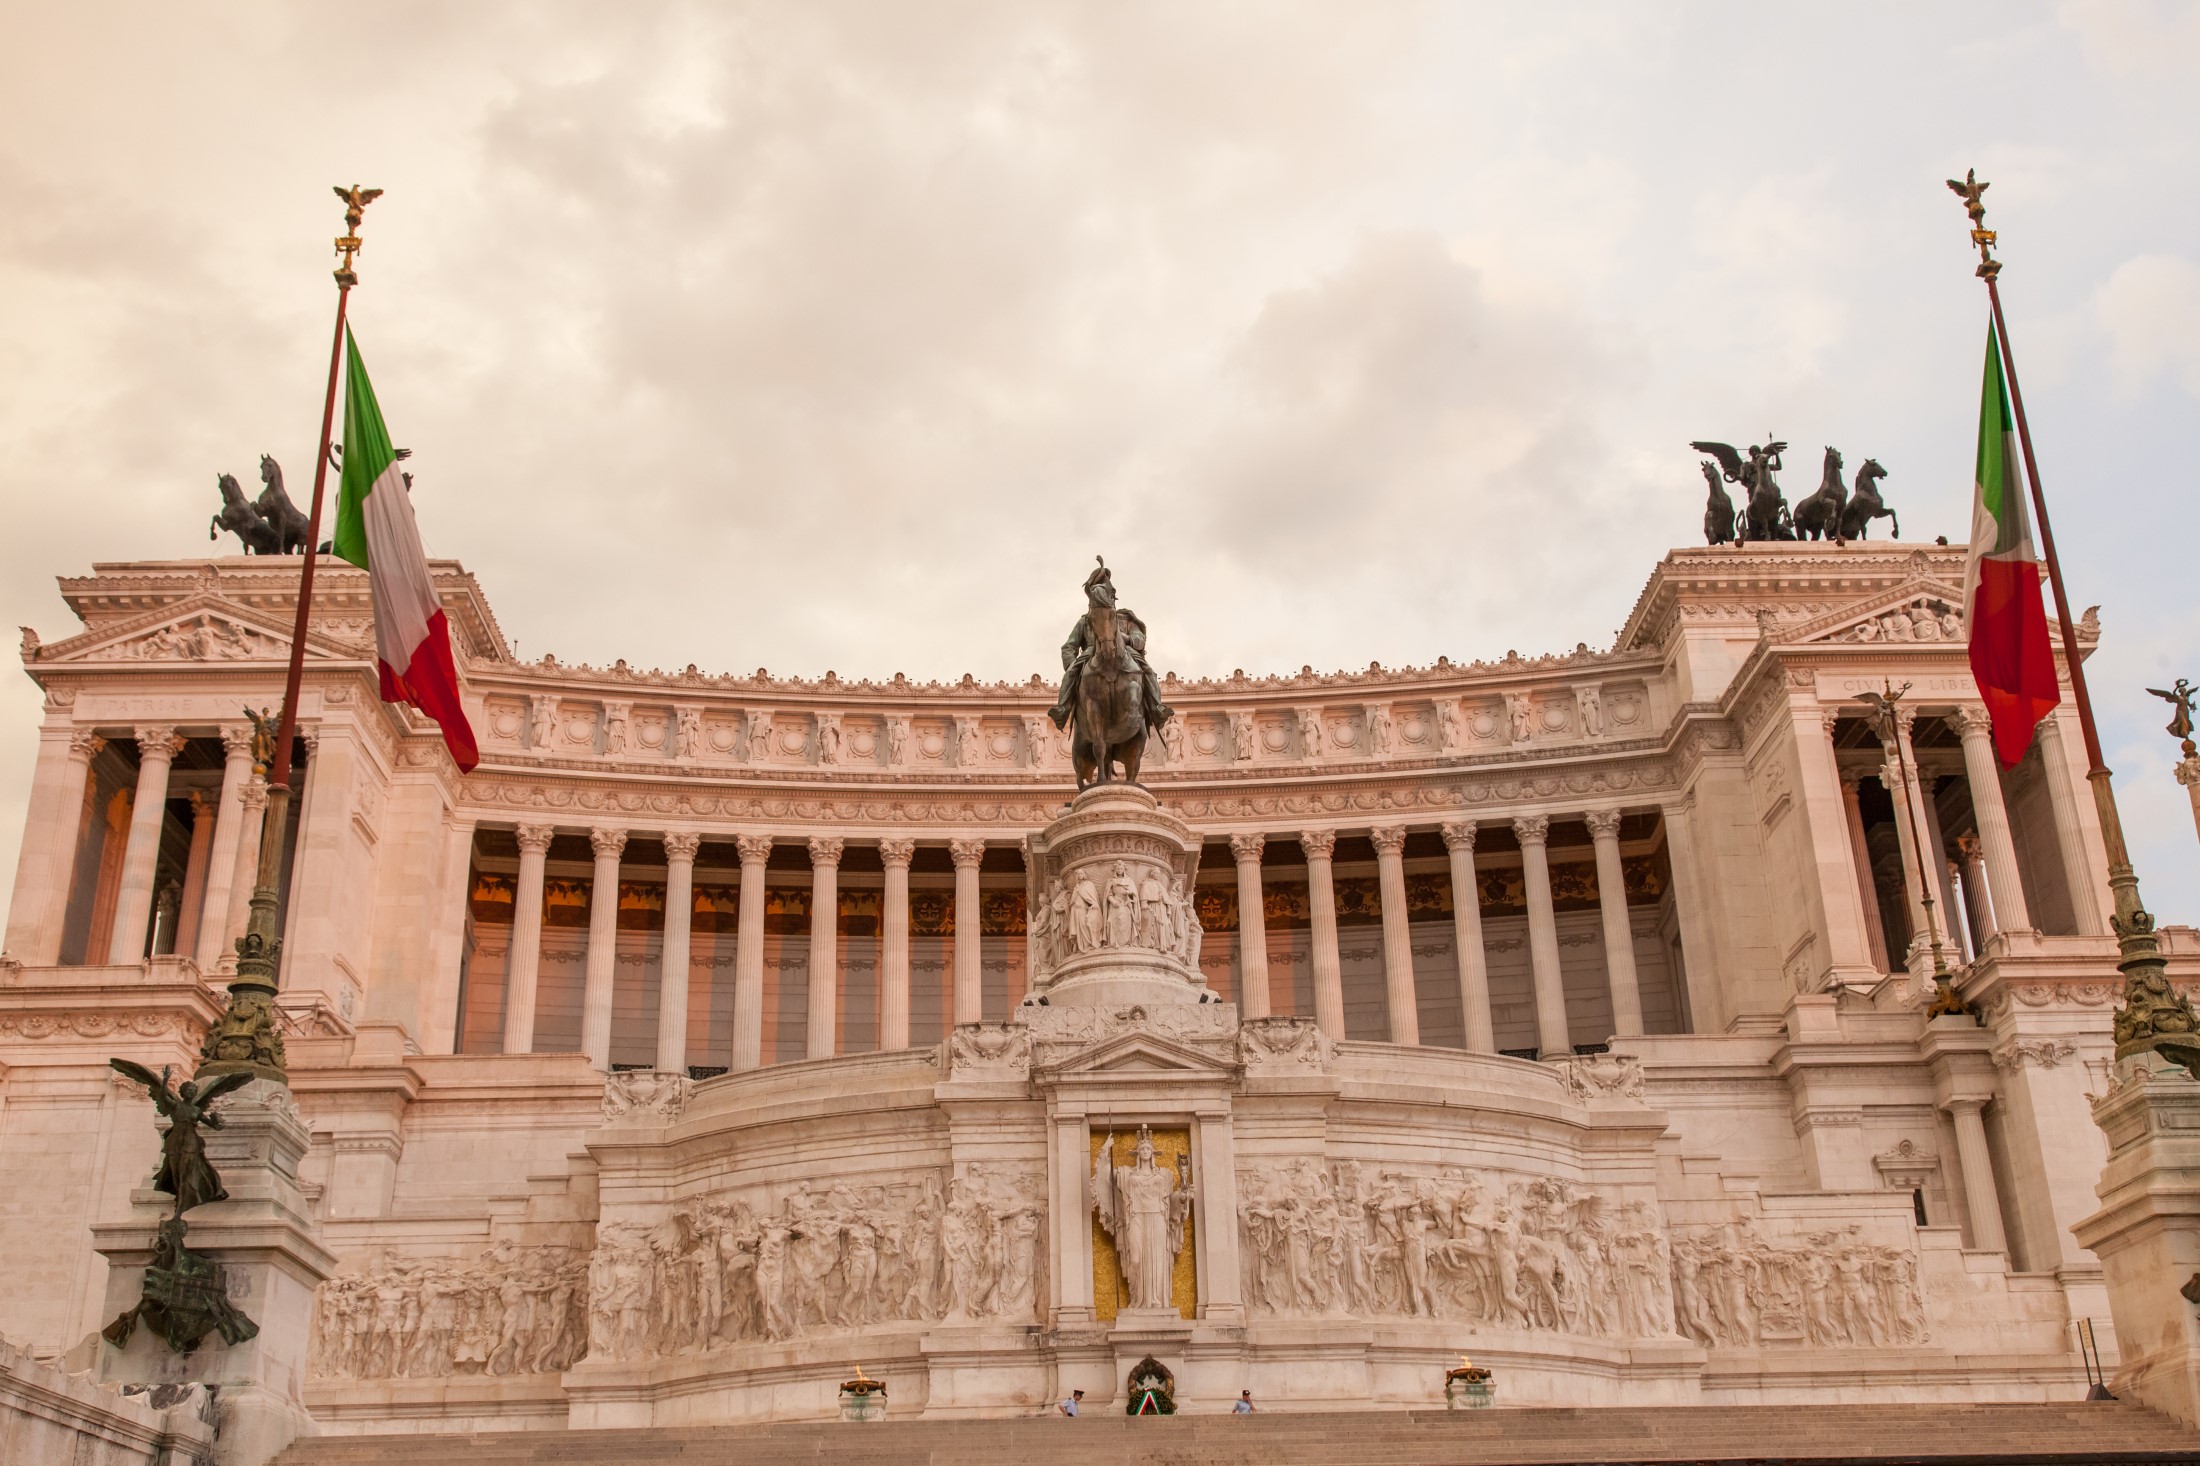 Altare della Patria (Altar of the Fatherland) is a monument built in honour of Victor Emmanuel, the first king of a unified Italy, located in Rome, Italy.